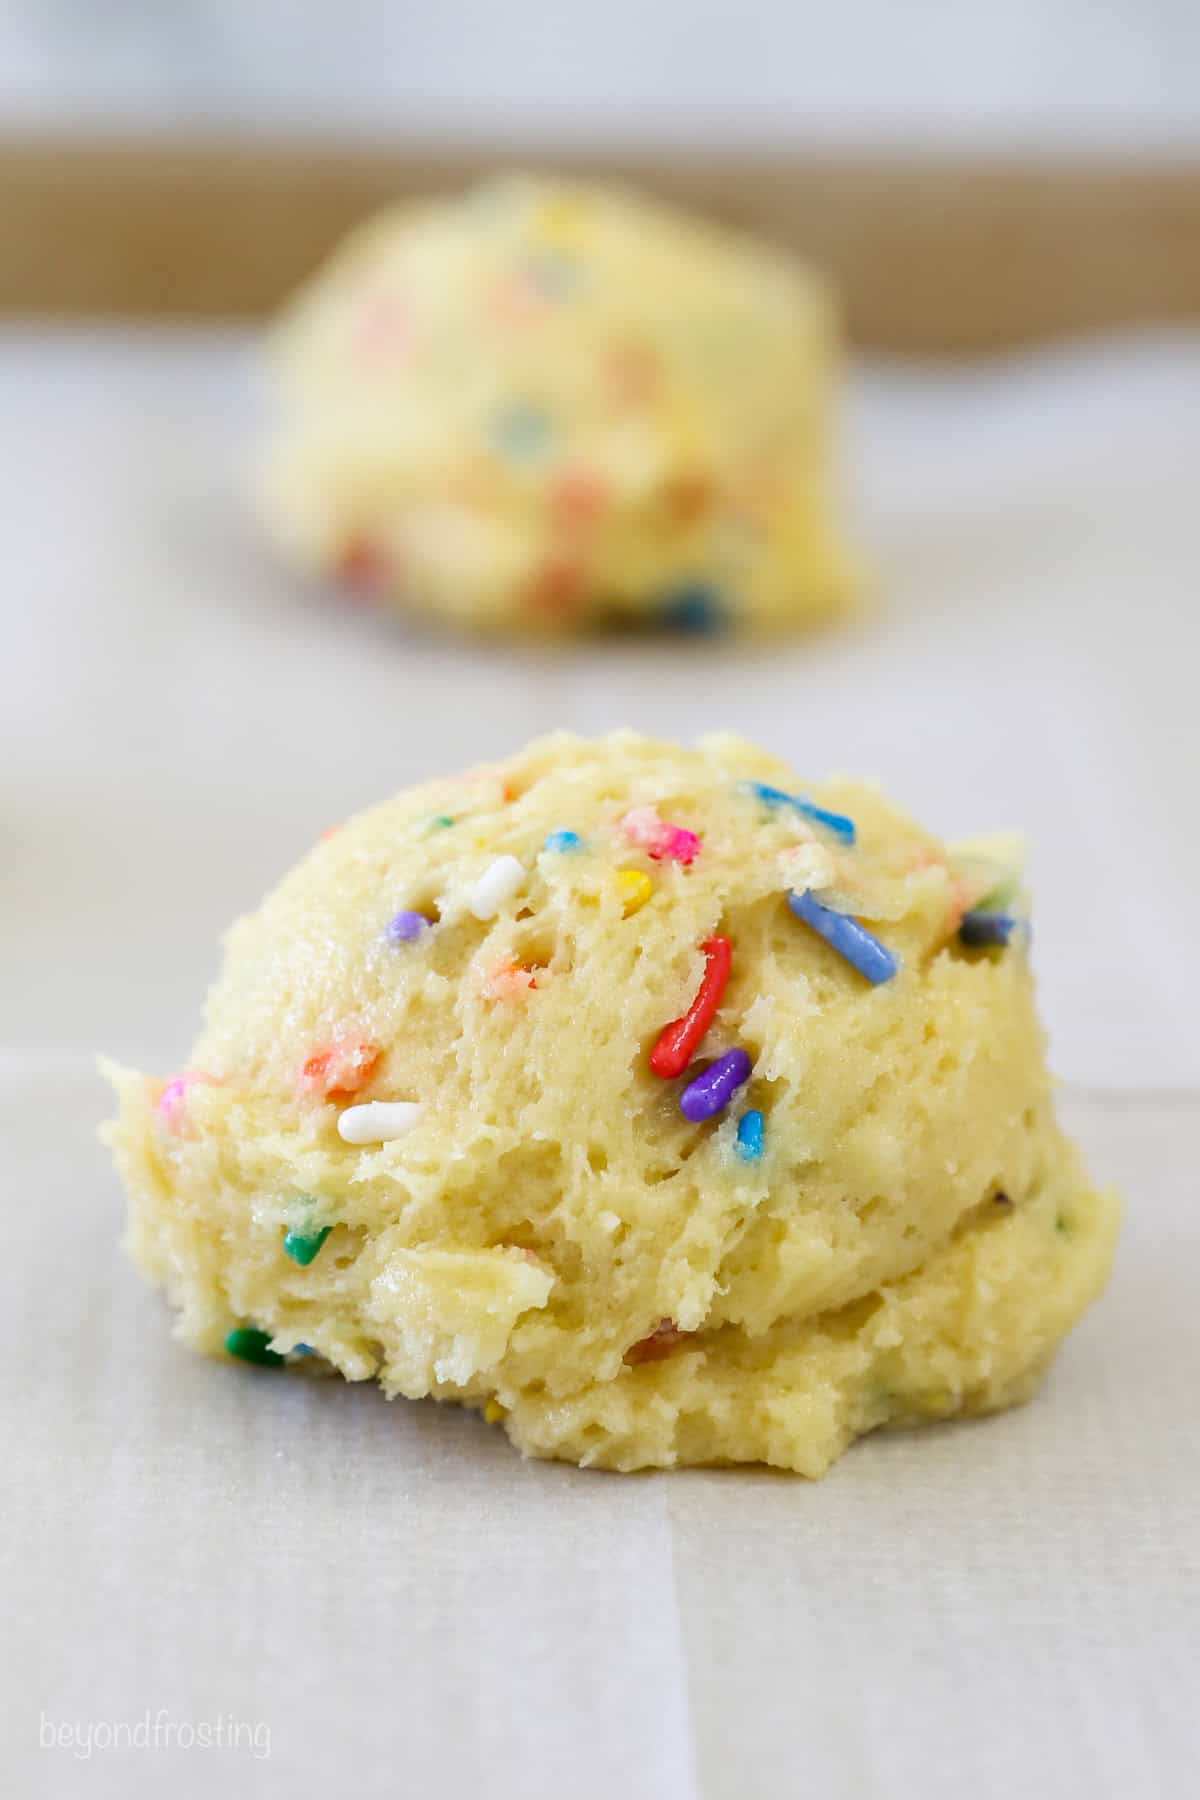 A scoop of funfetti cookie dough with a second scoop in the background.